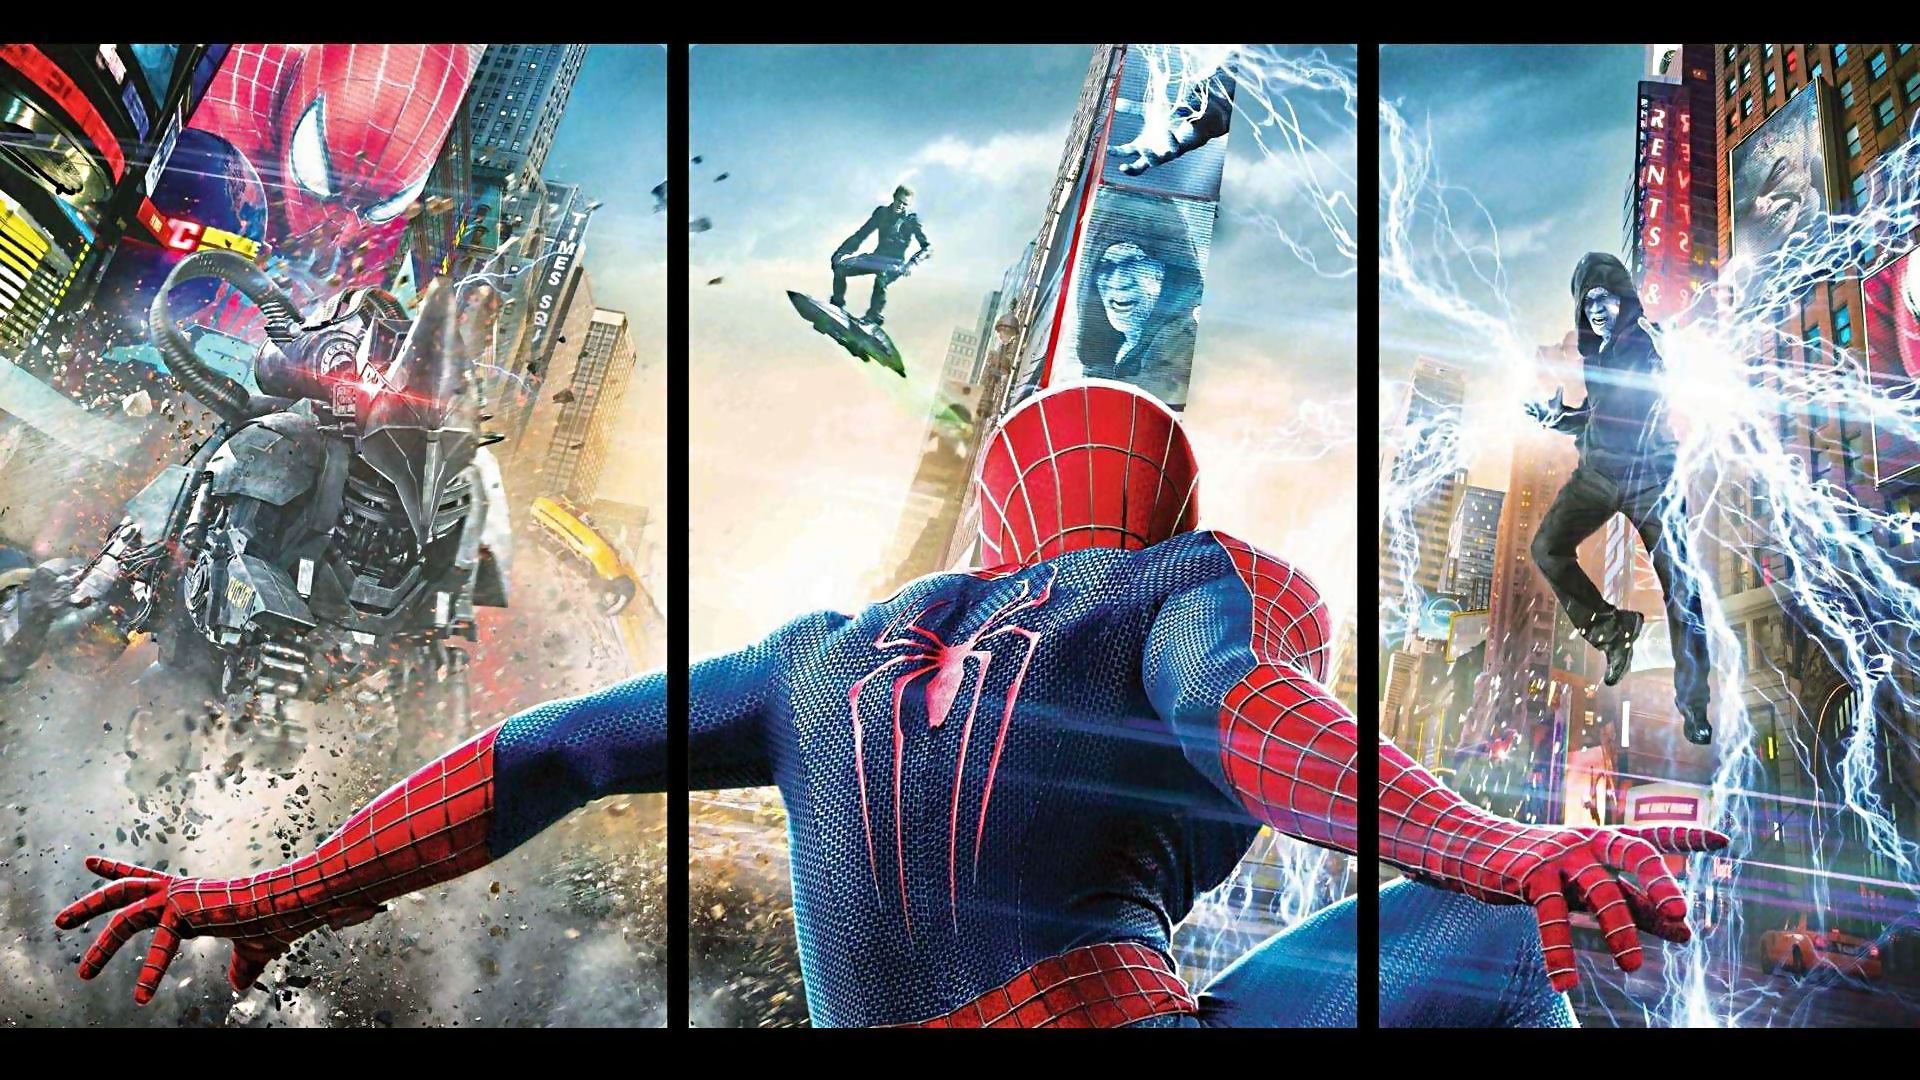 DeviantArt More Like The Amazing Spider Man 2 Movie Poster